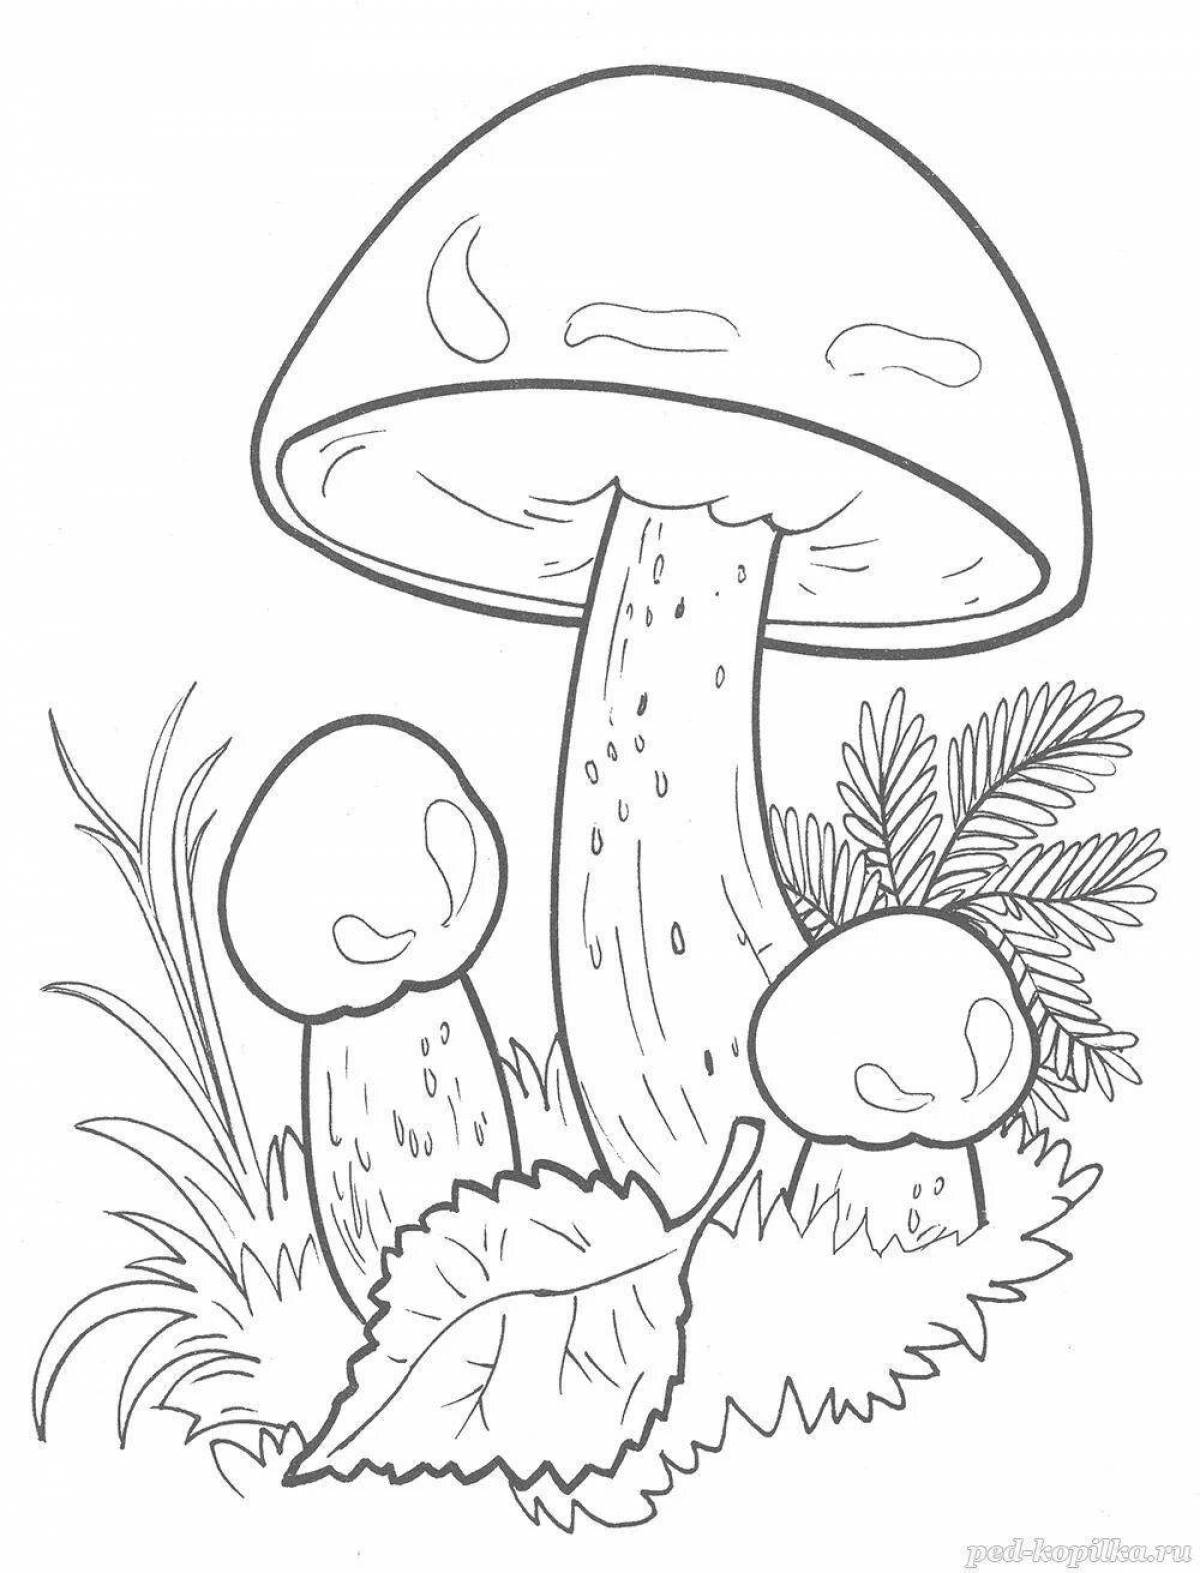 Spectacular coloring with porcini mushrooms for children